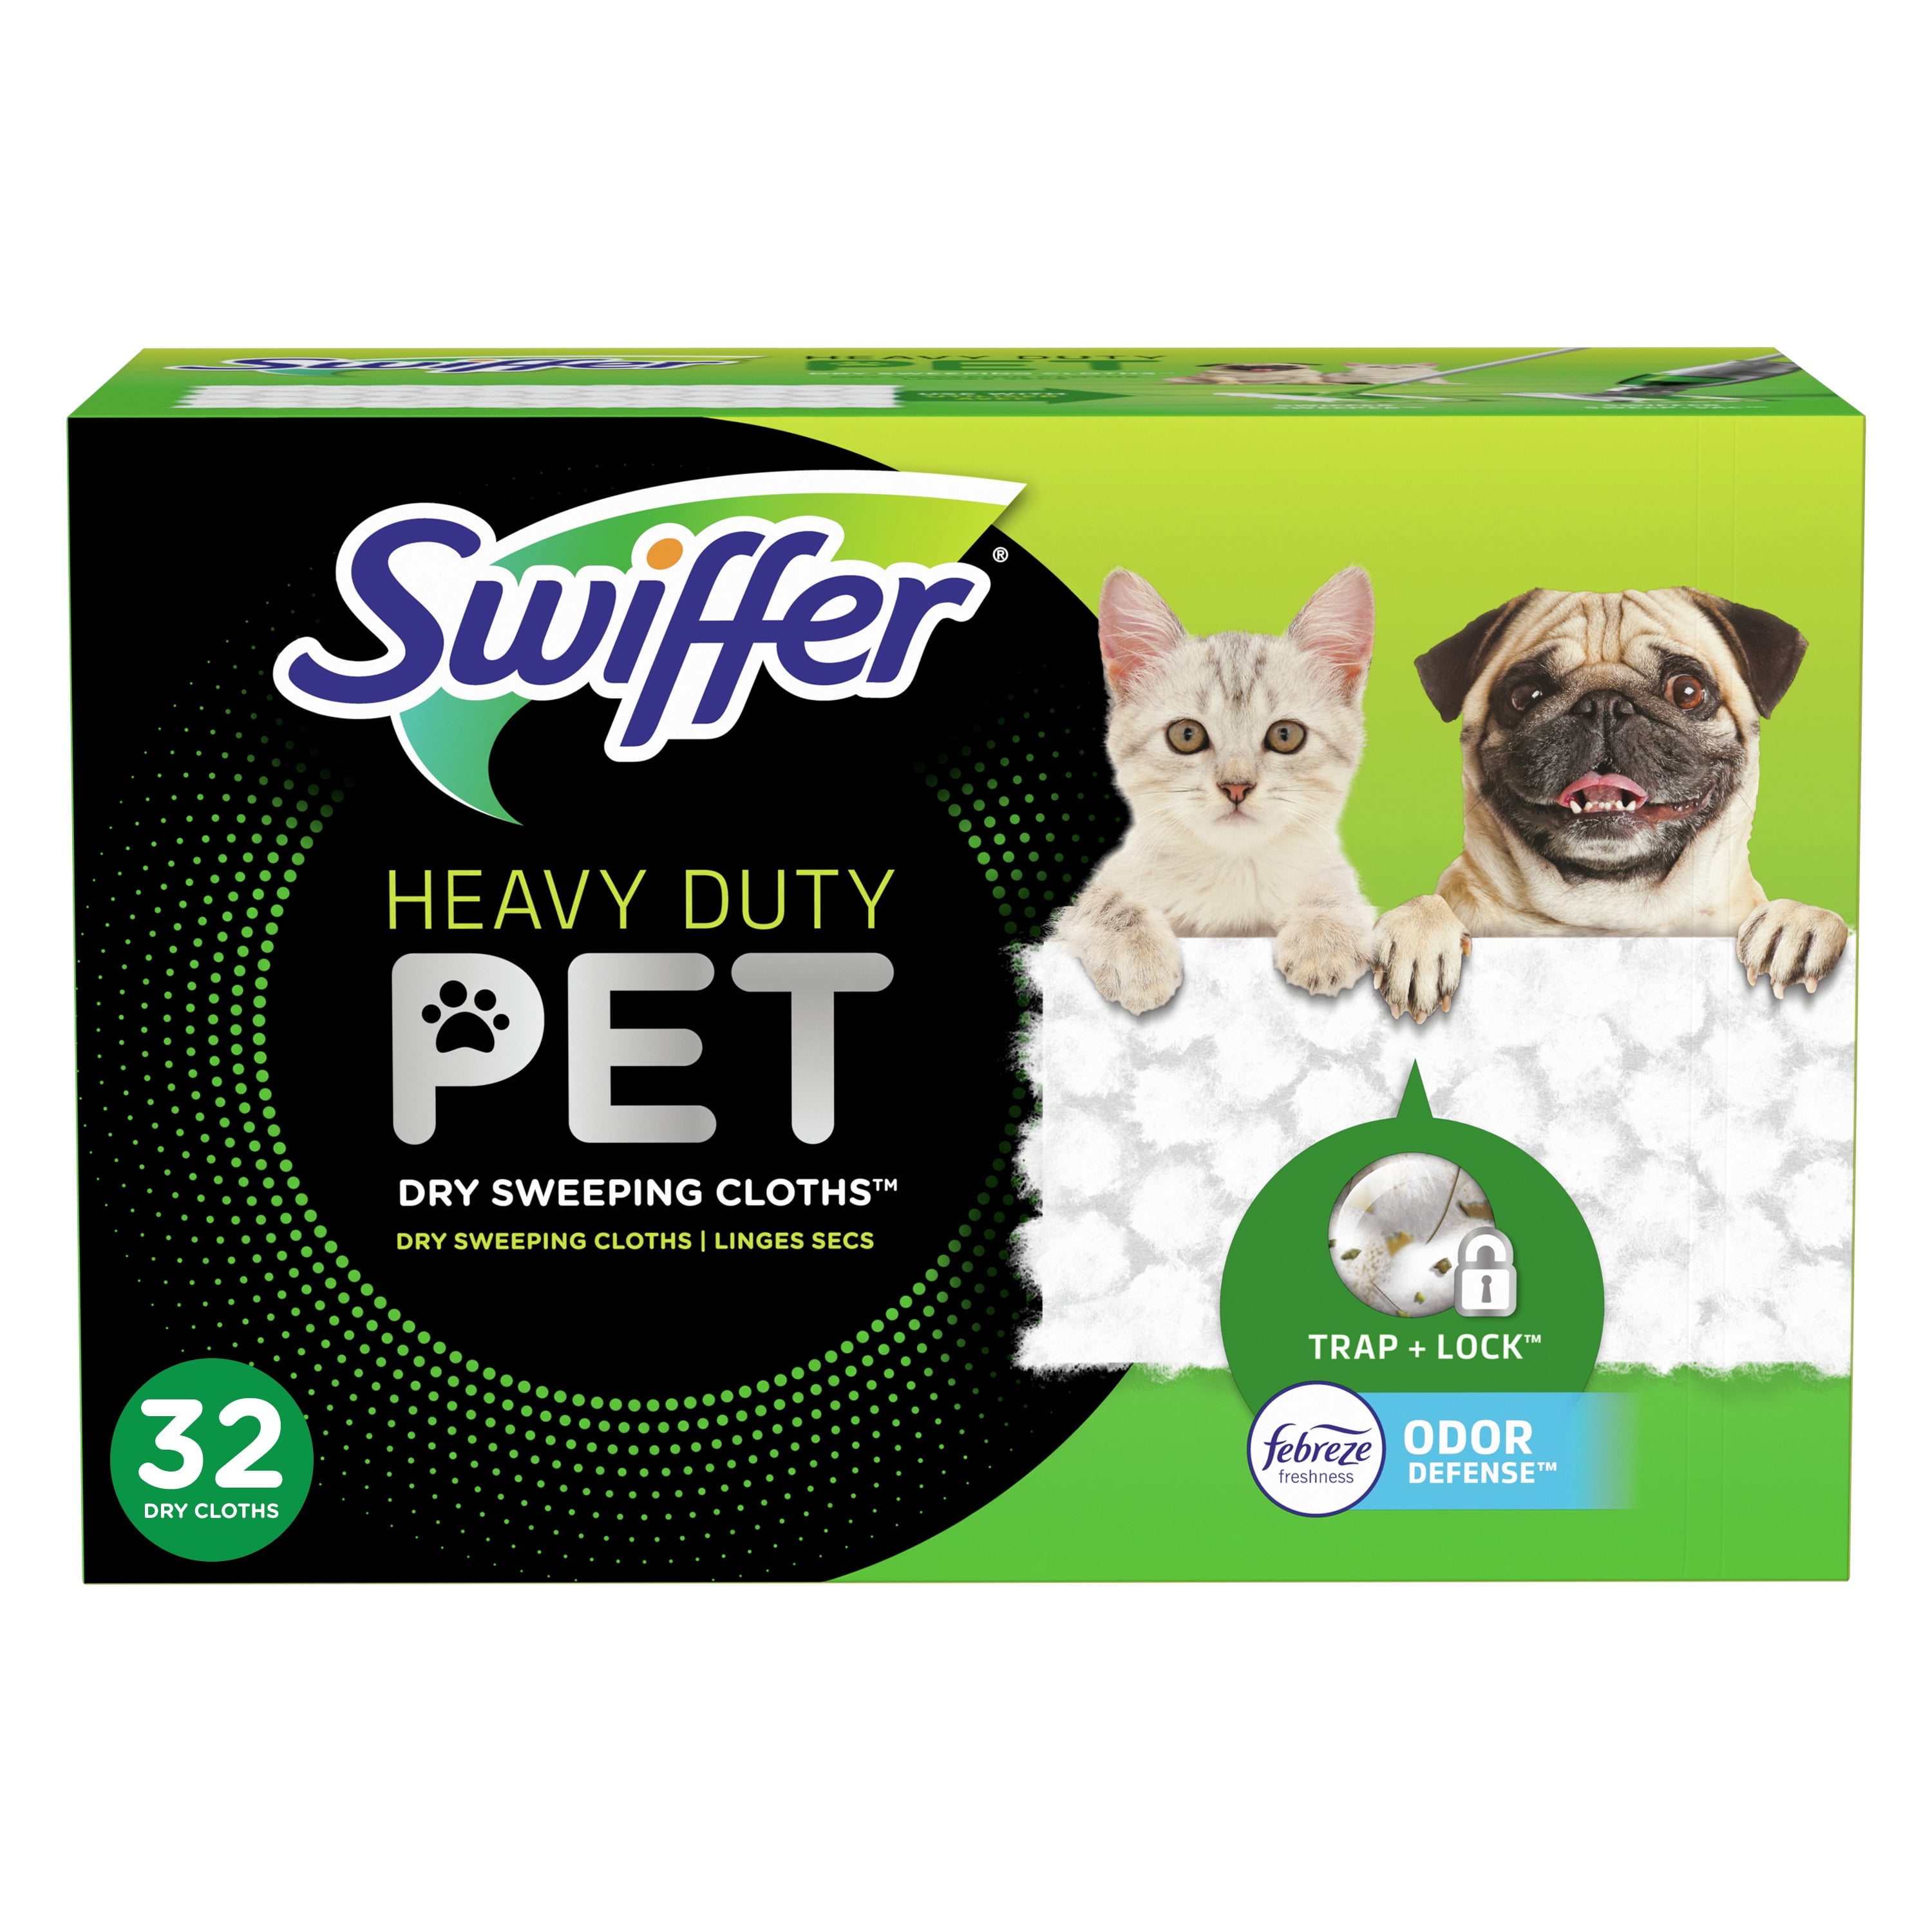 Swiffer Sweeper Pet Heavy Duty Multi-Surface Dry Sweeping Cloths, Floor Cleaner Refills for Dust Mop, 32 count